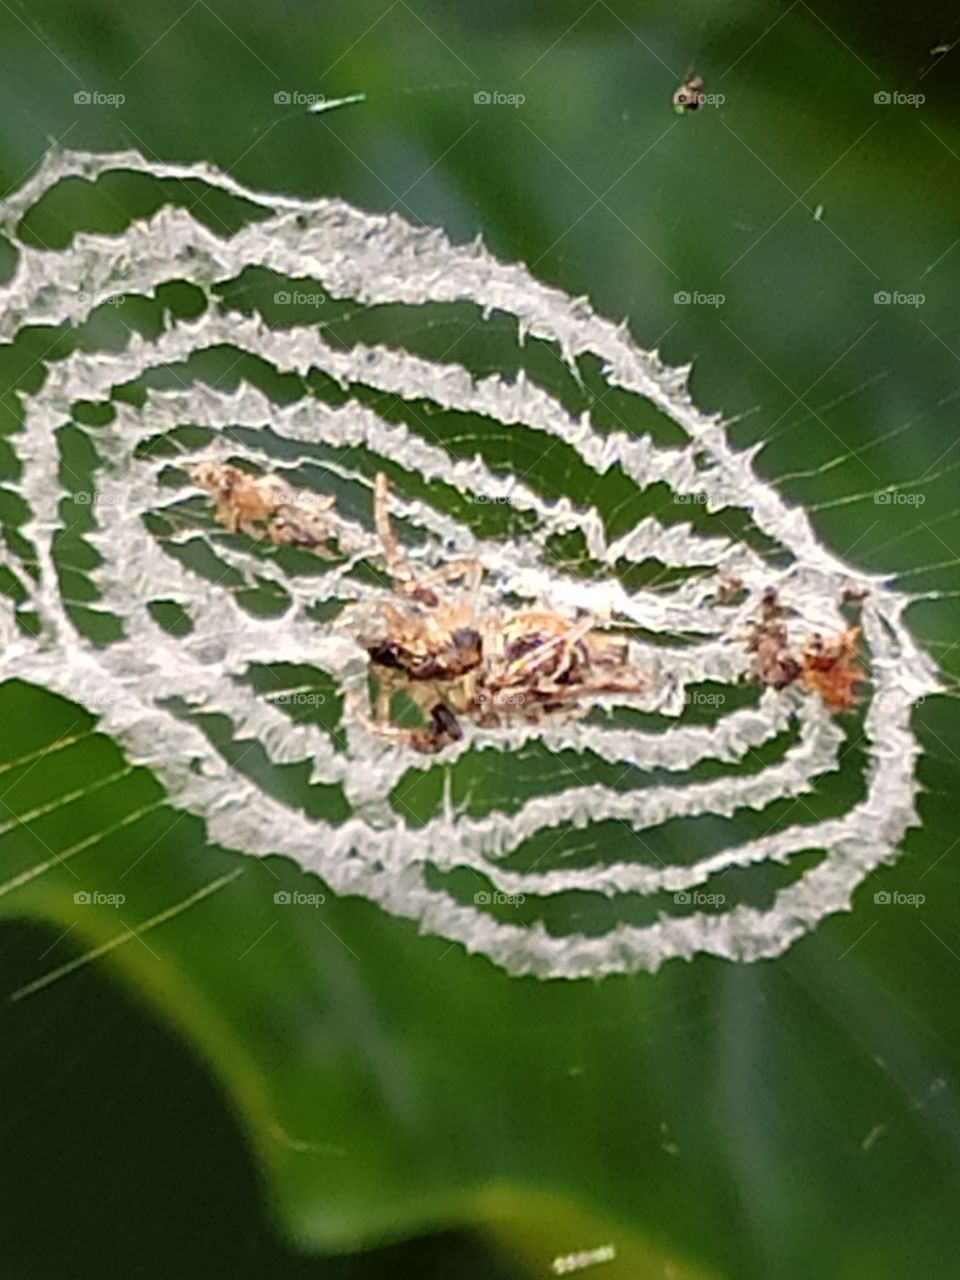 Closeup shots of dead insects on the spider web